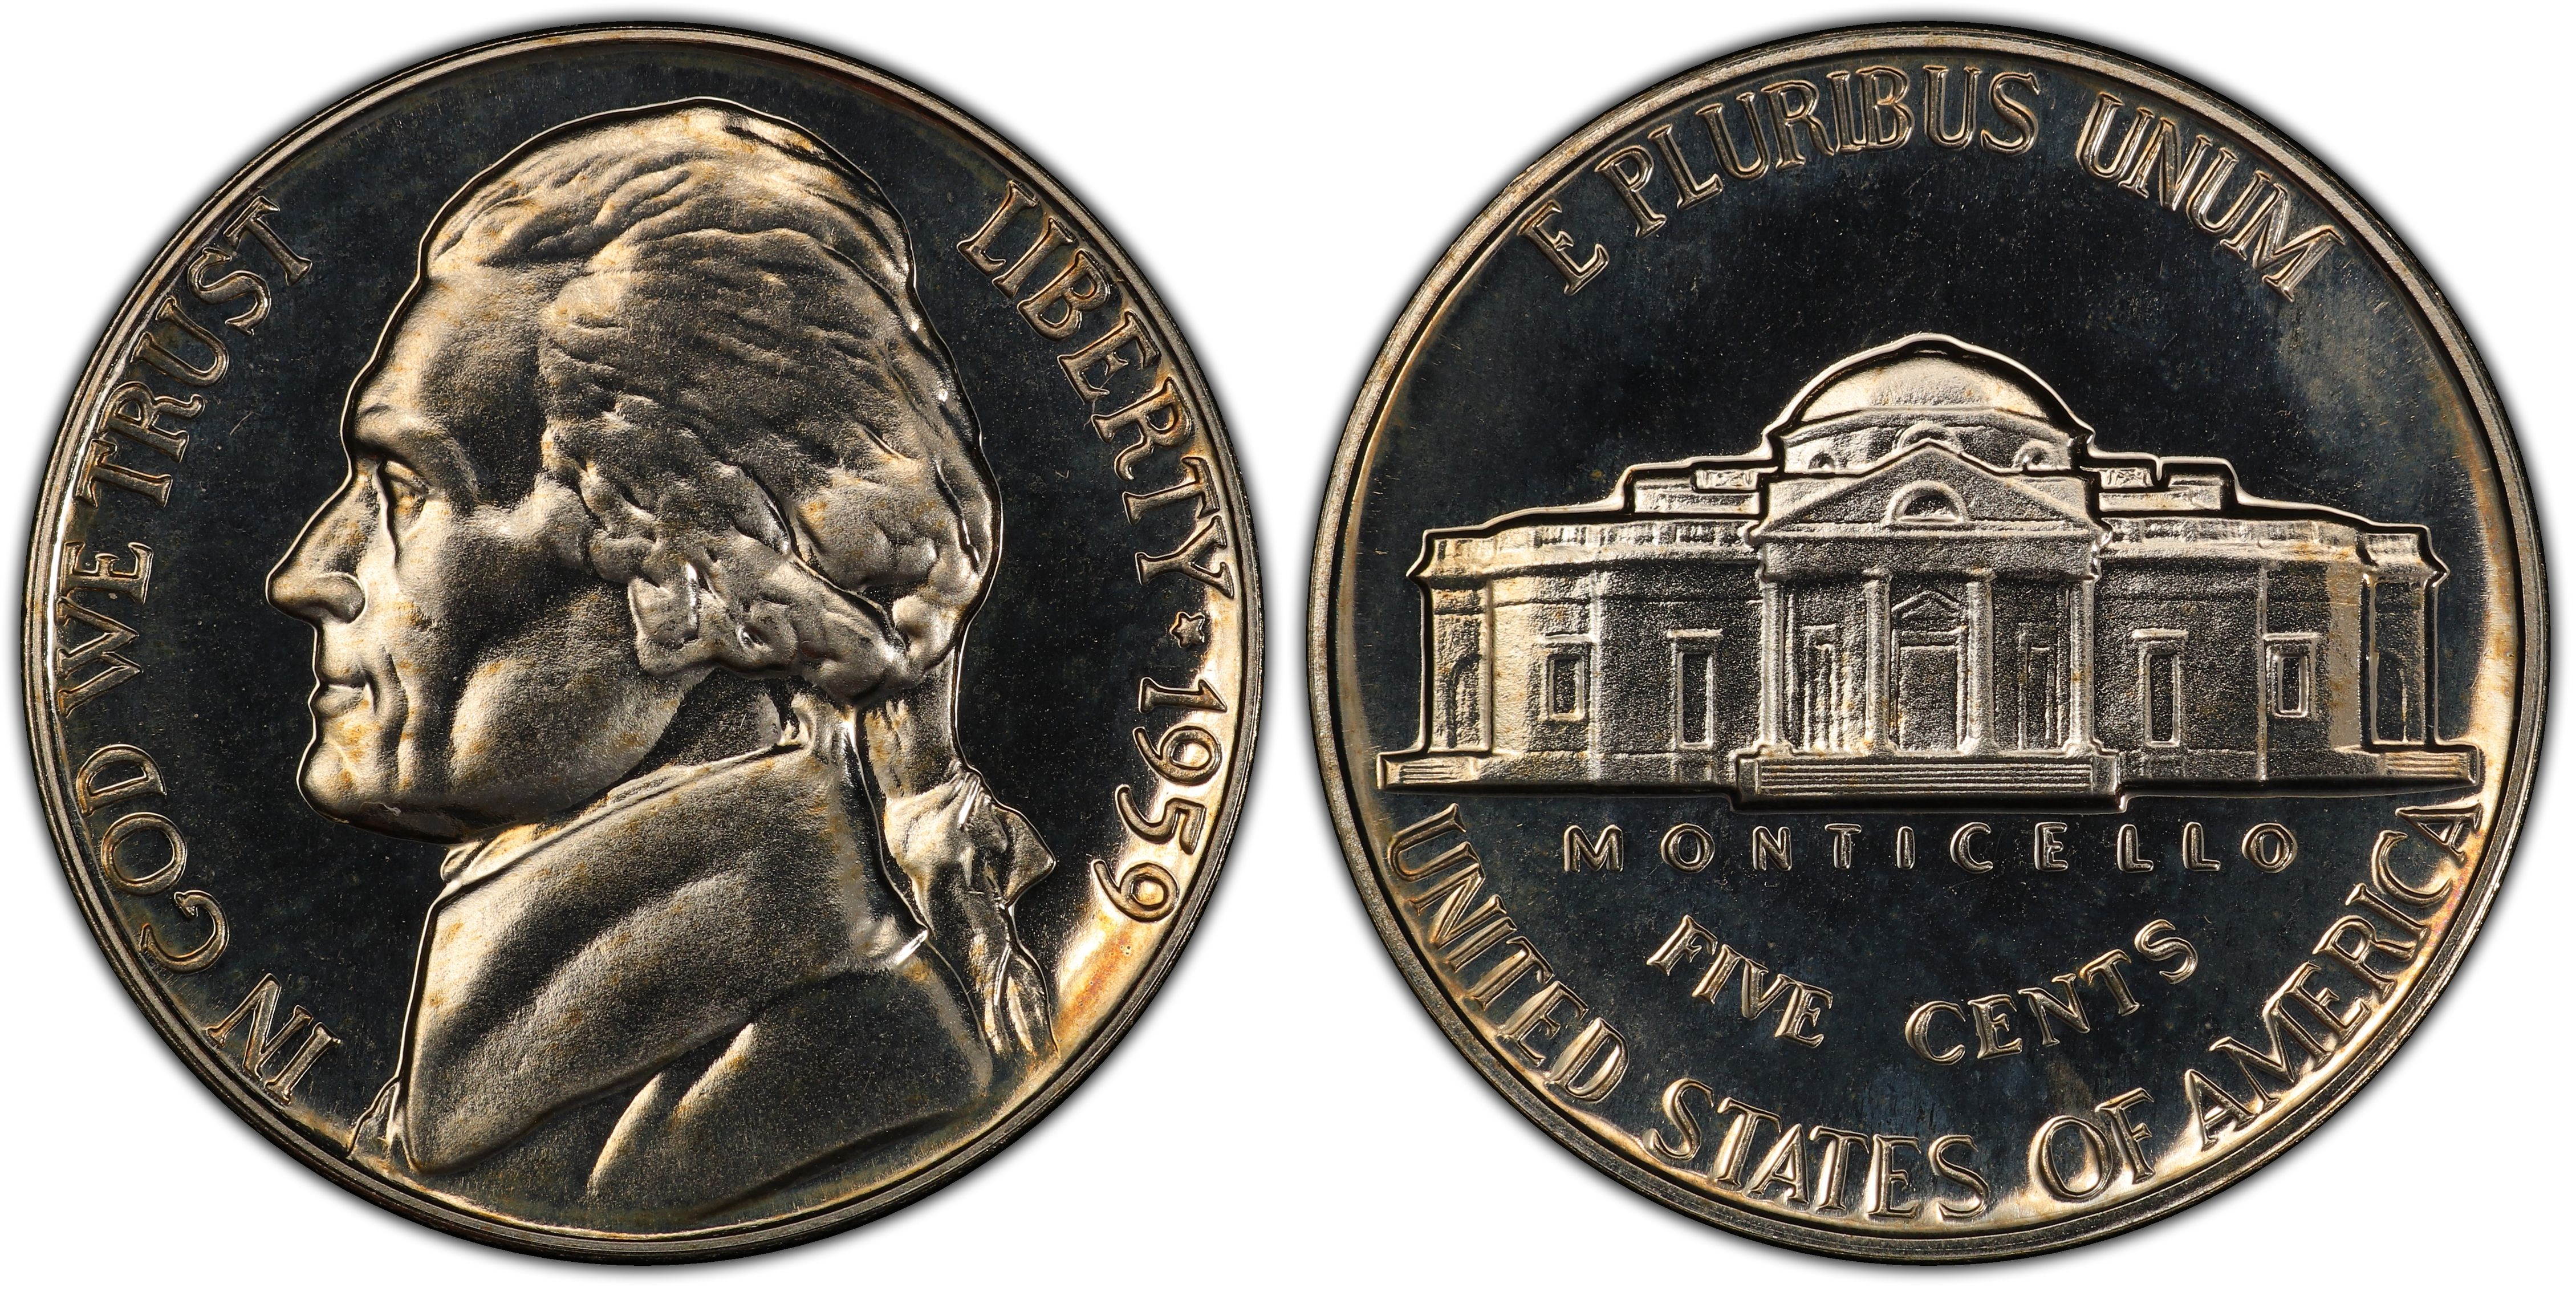 1959 5C (Proof) Jefferson Nickel - PCGS CoinFacts